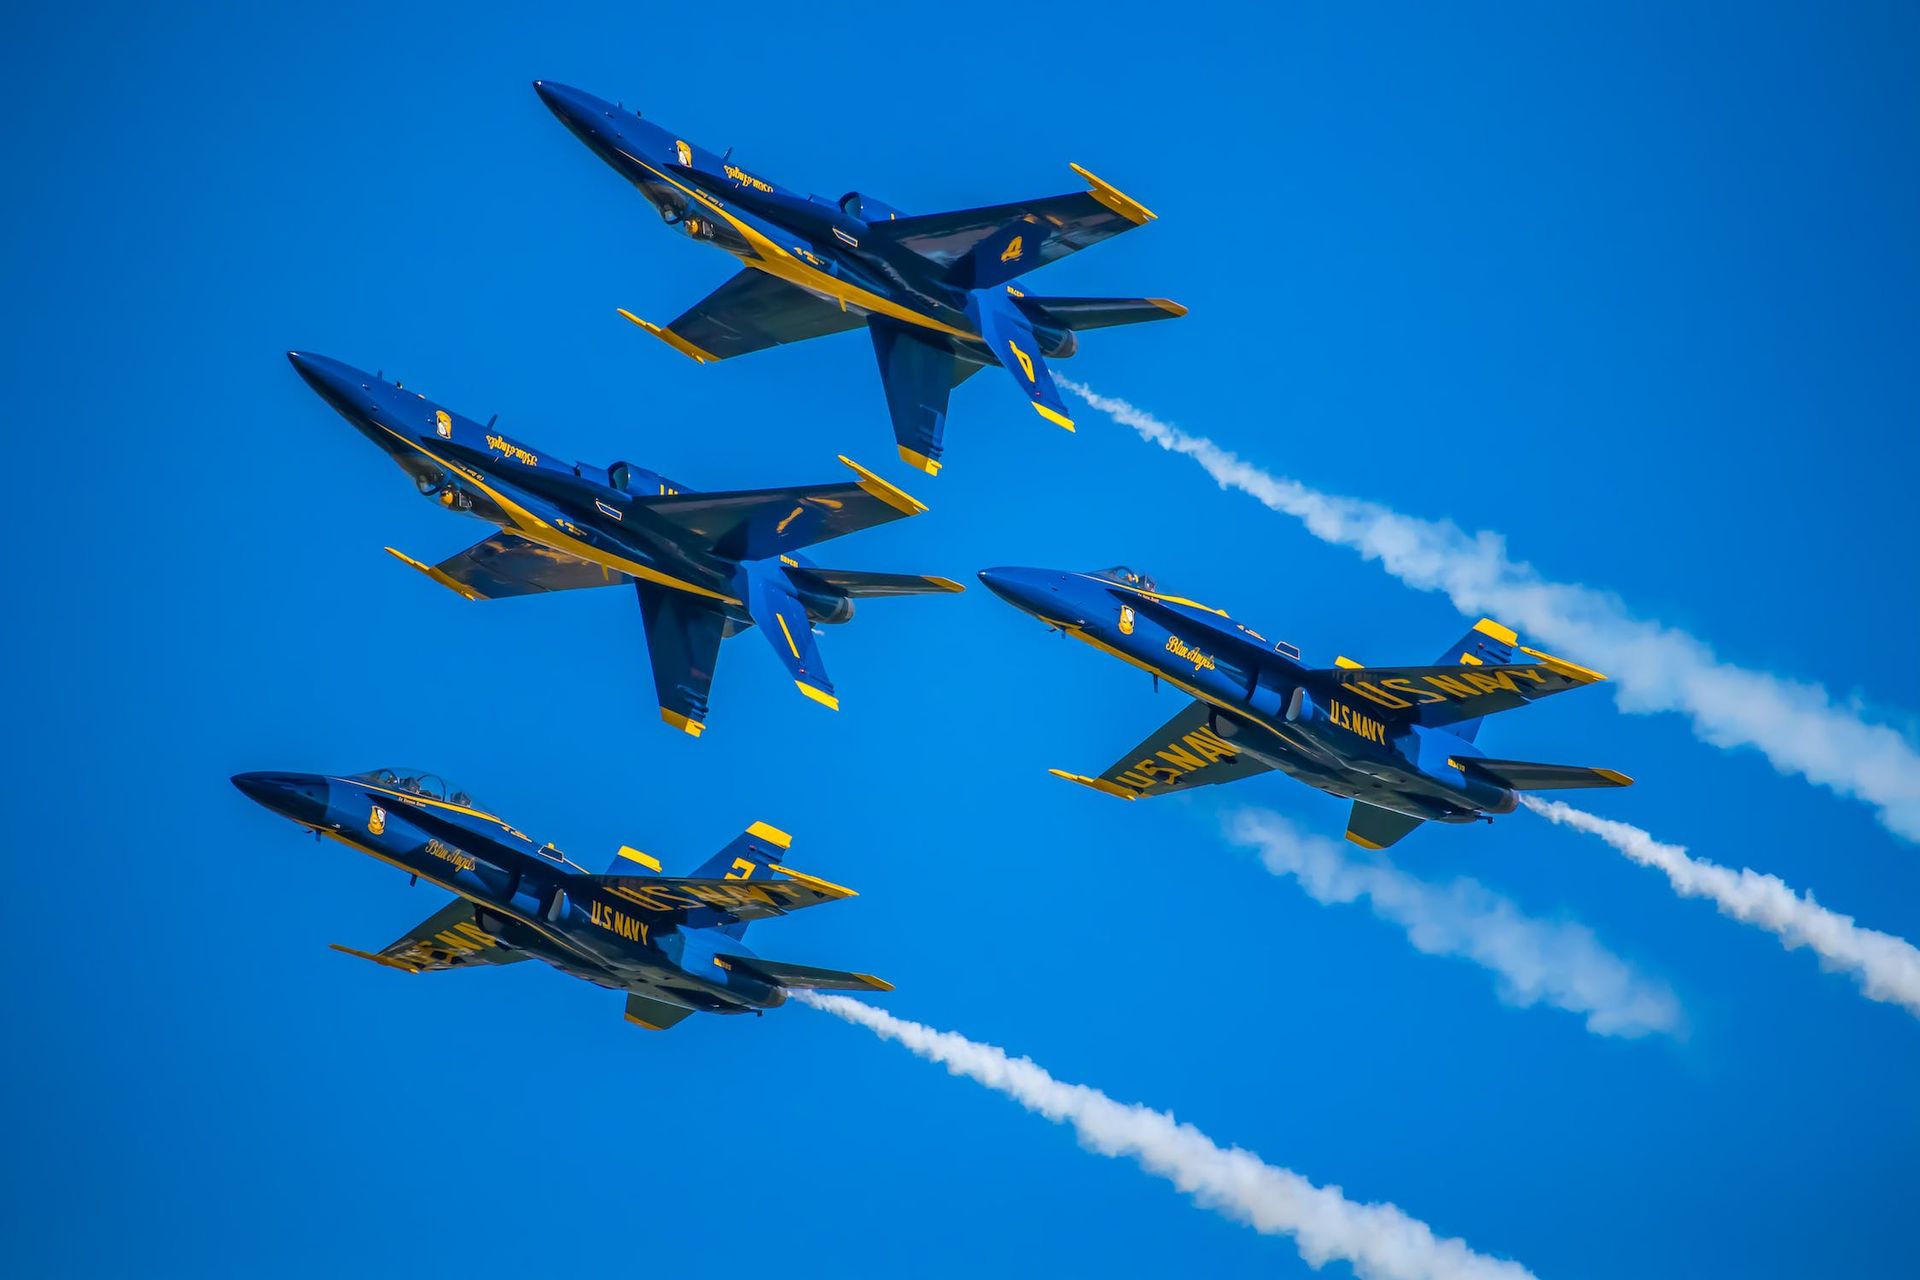 Experience the Air Show in Ocean City Maryland